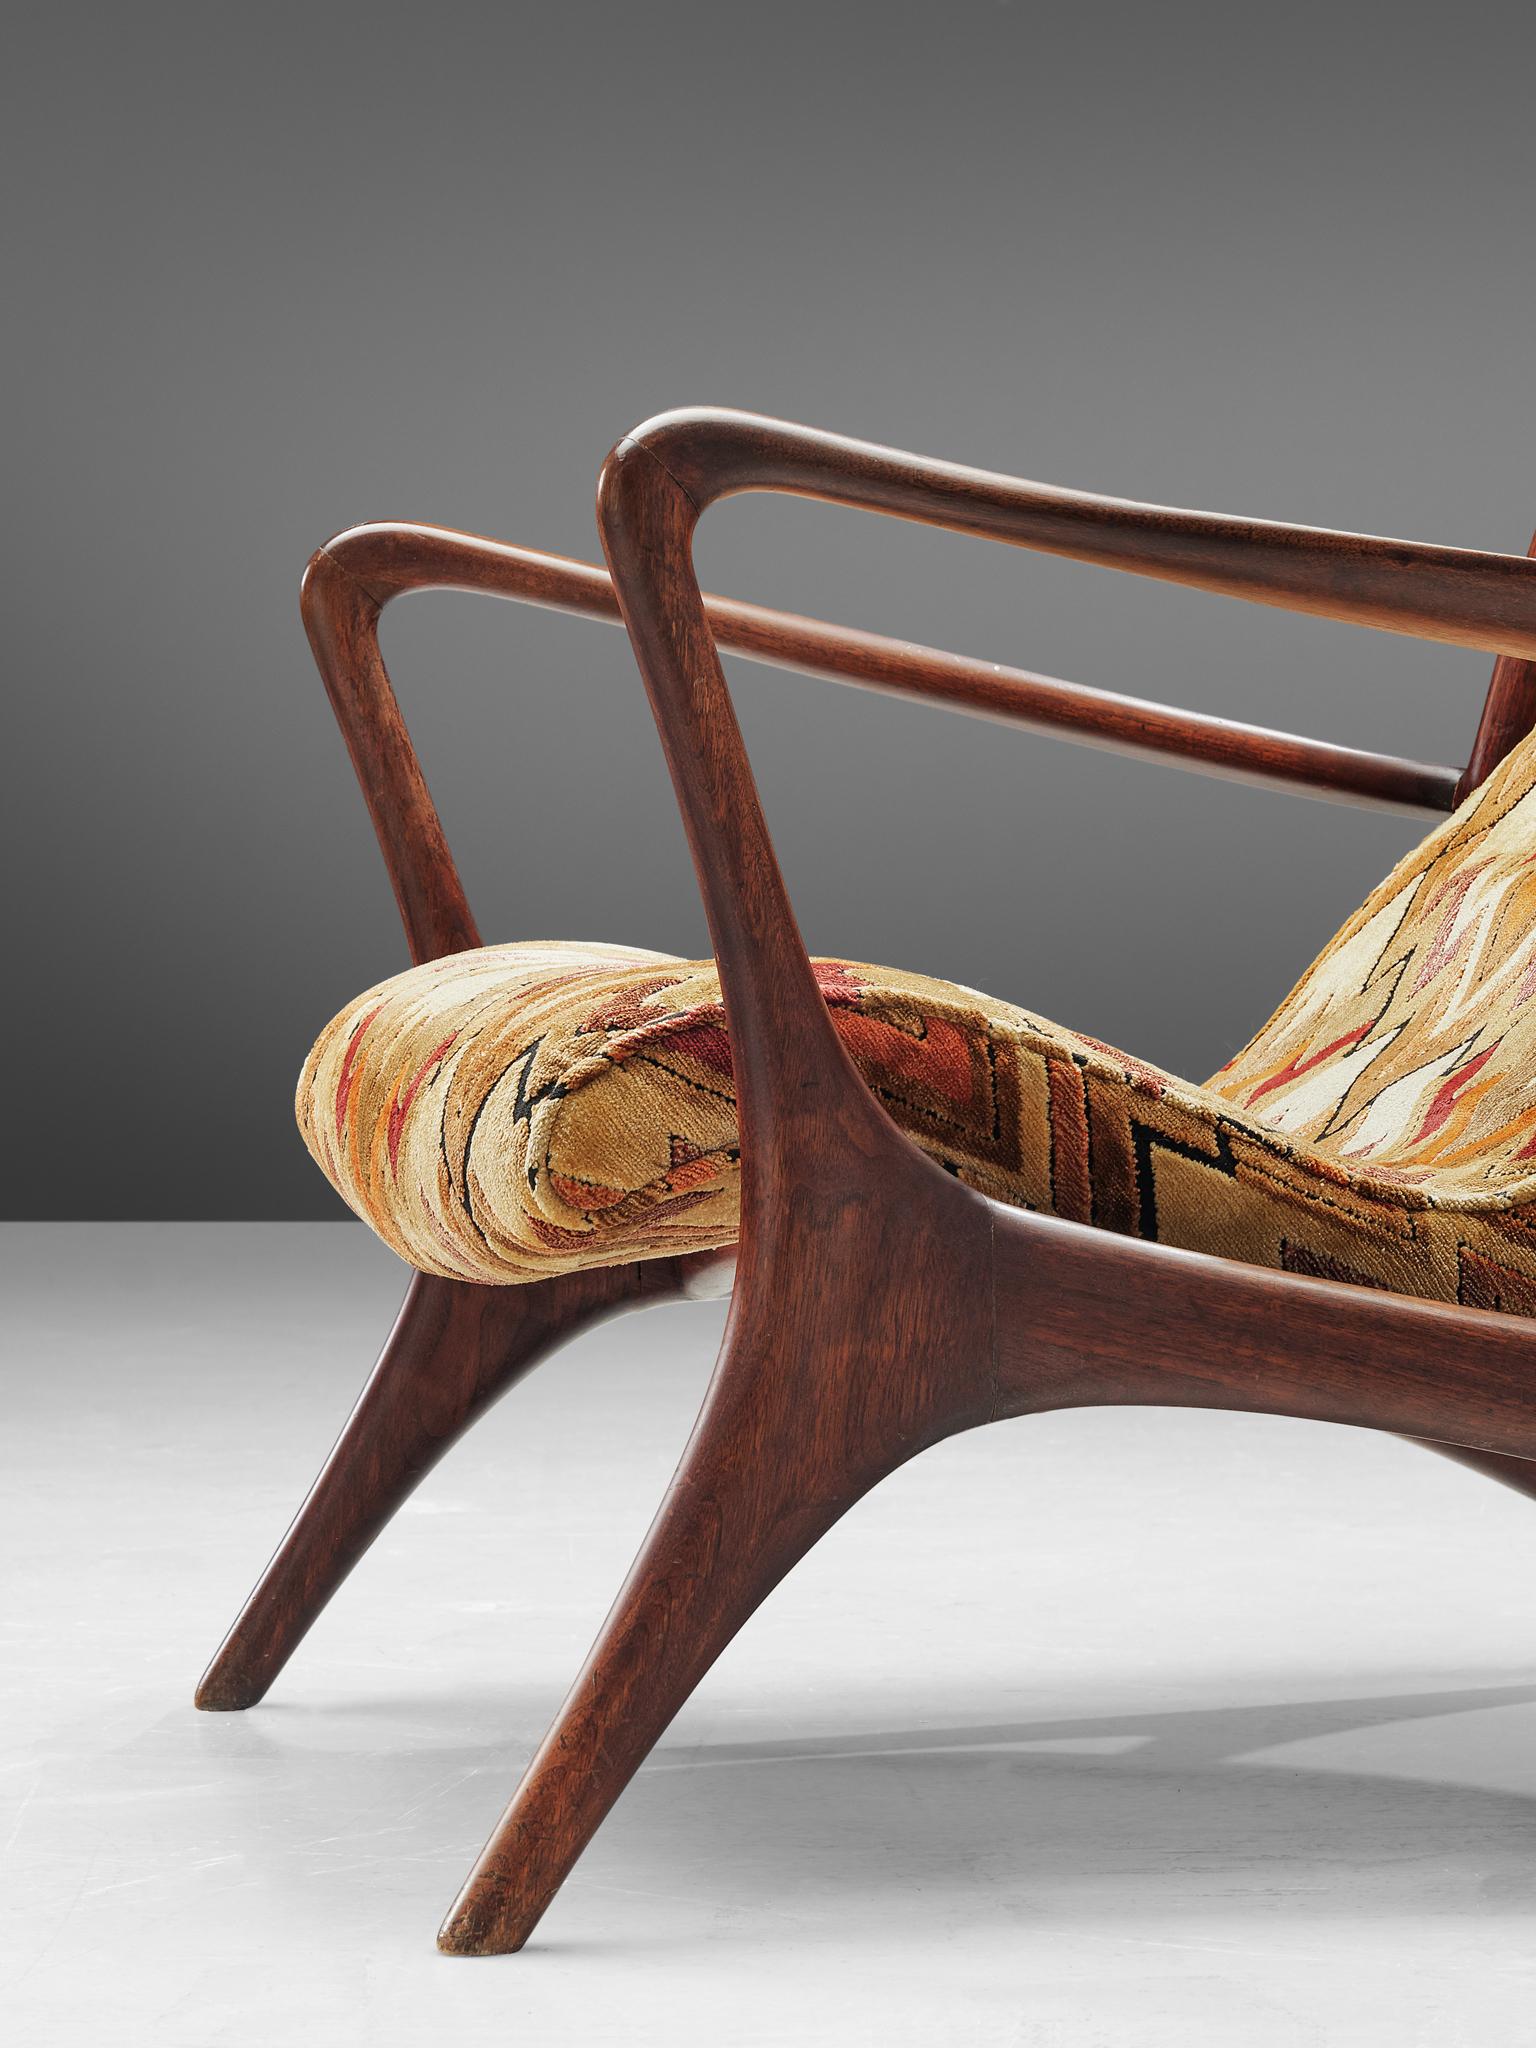 Mid-20th Century Vladimir Kagan 'Contour' Lounge Chair in Patterned Upholstery